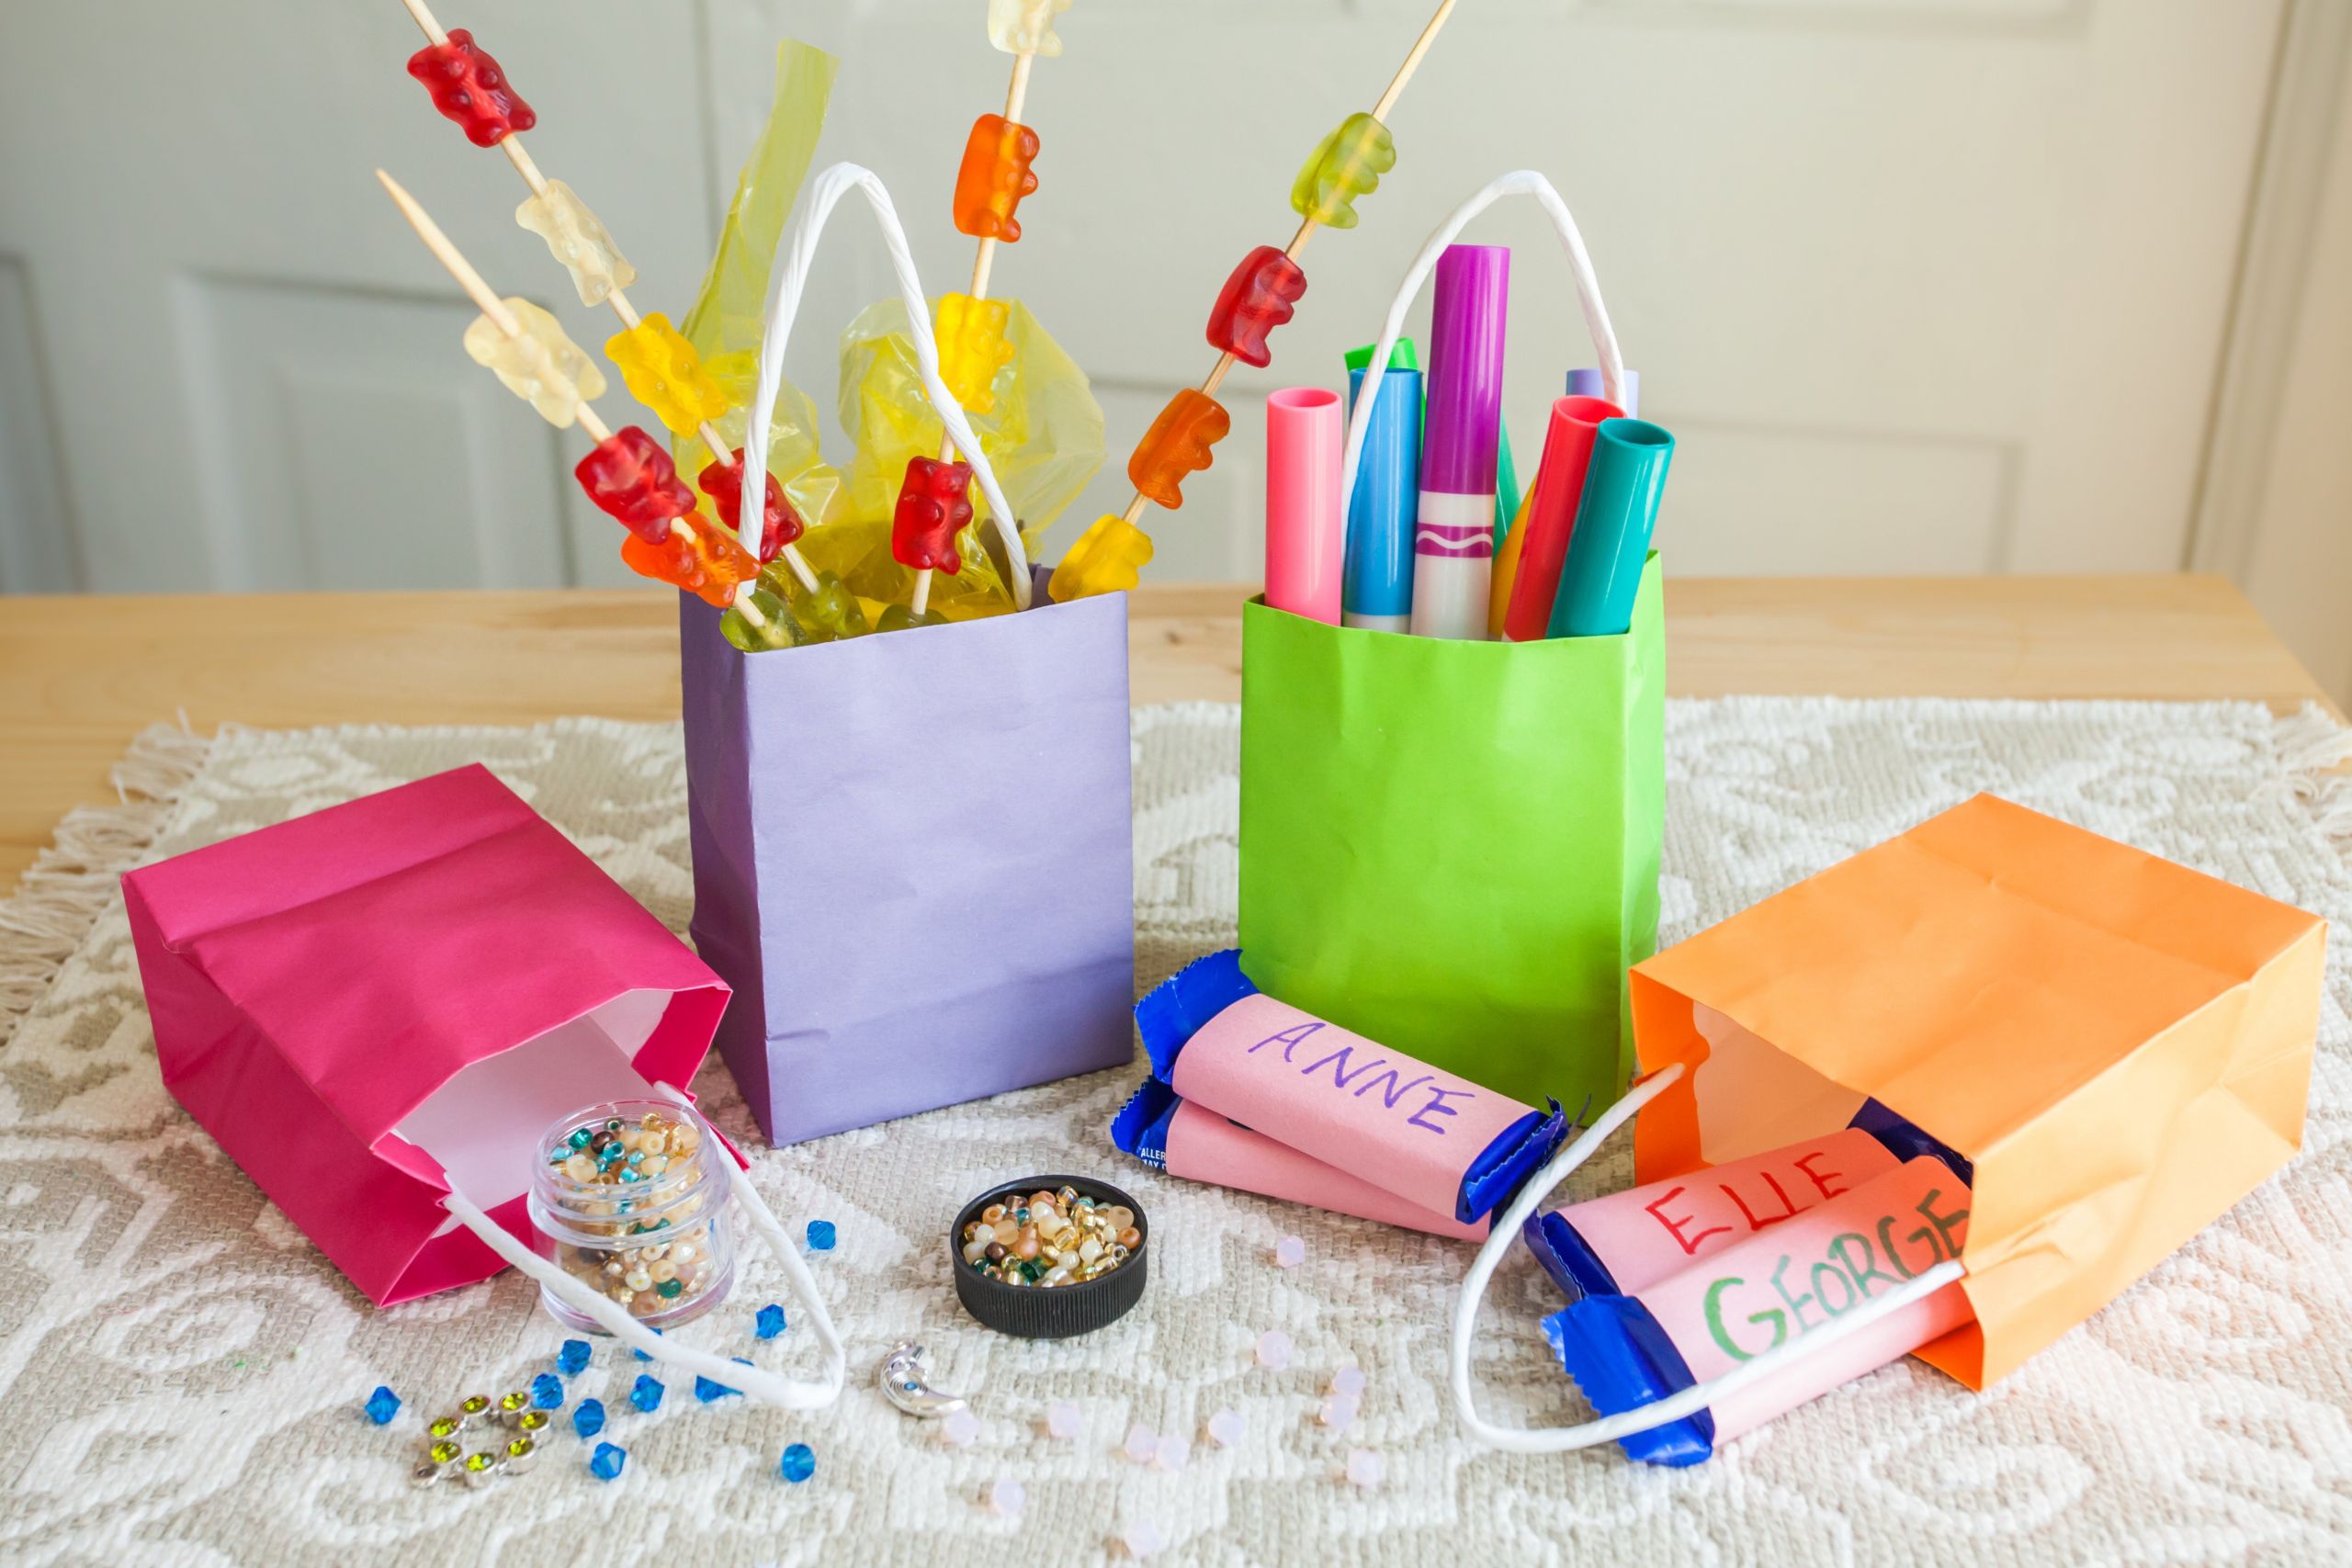 Birthday Party Goodie Bags
 Ideas for Kids Birthday Party Gift Bags with